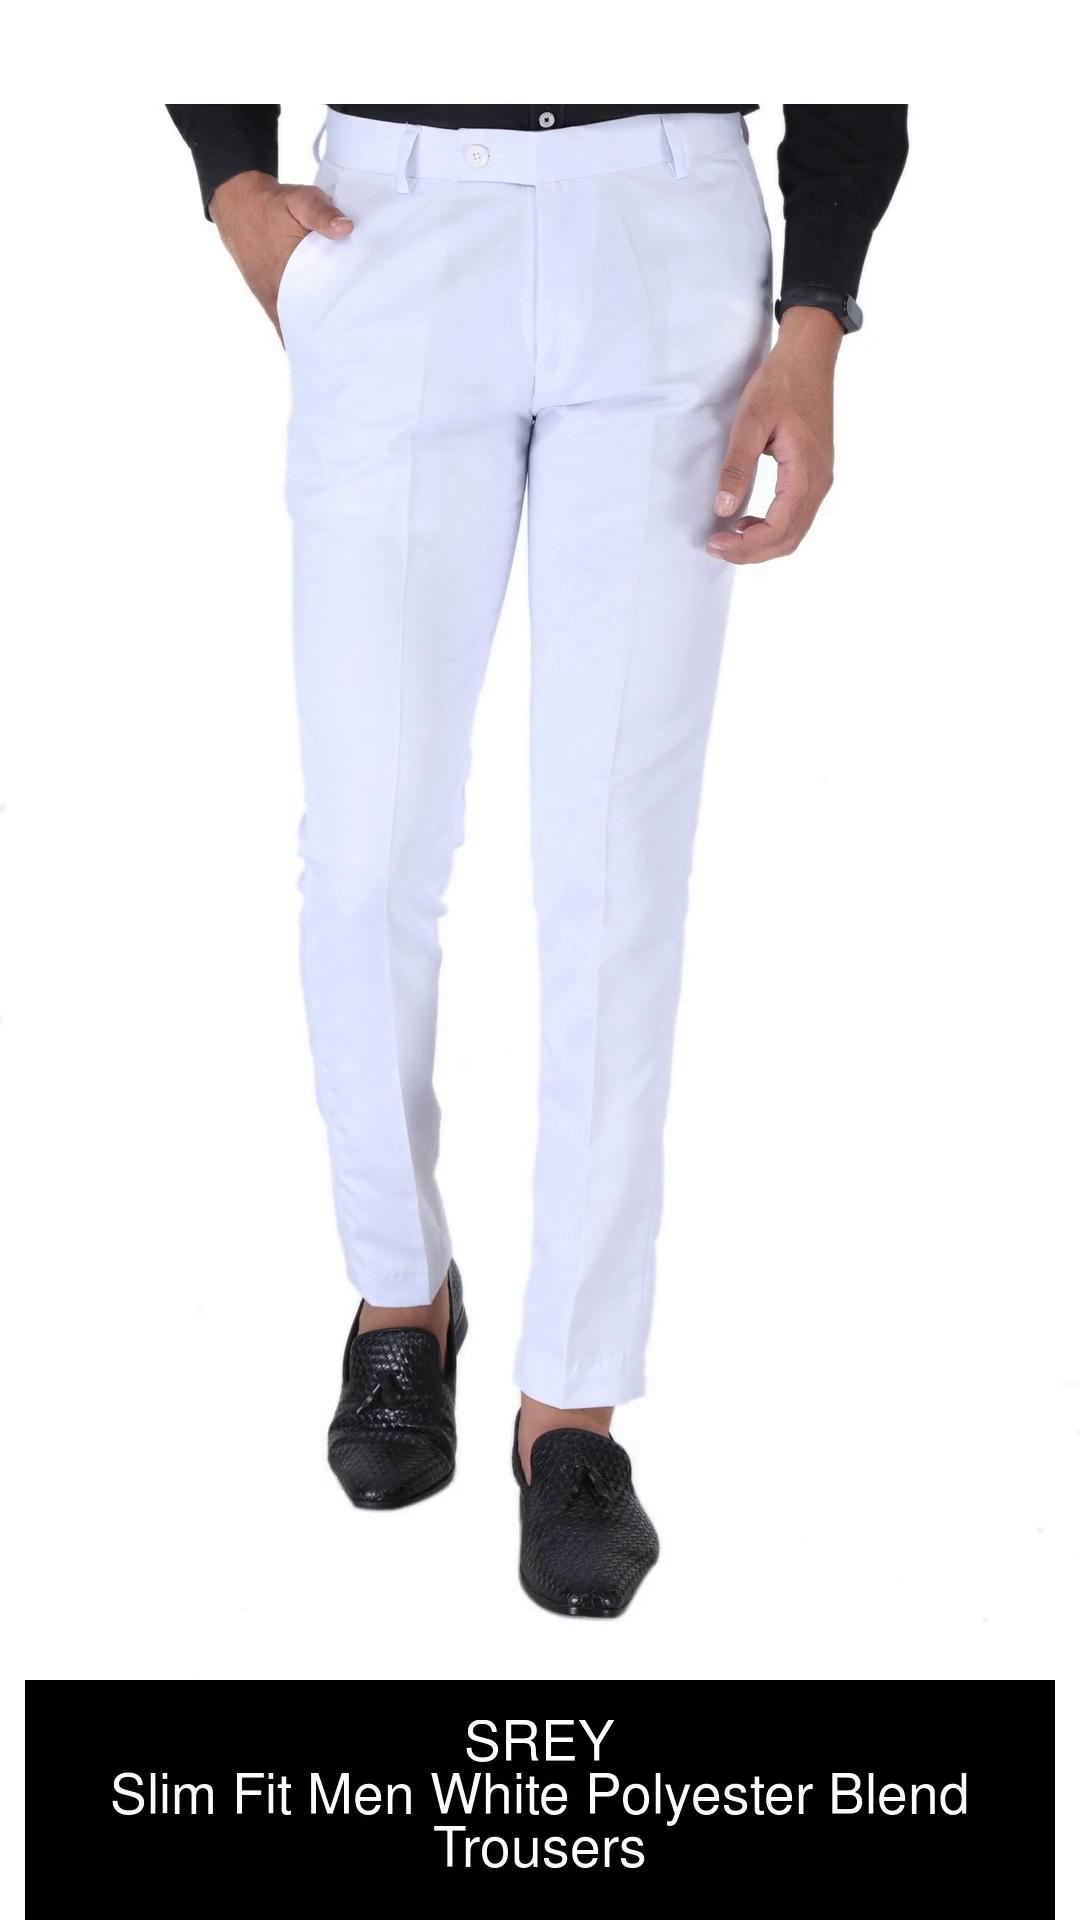 Cotton Chinos White Apple MenS Slim Fit Casual Trousers Size 30X36